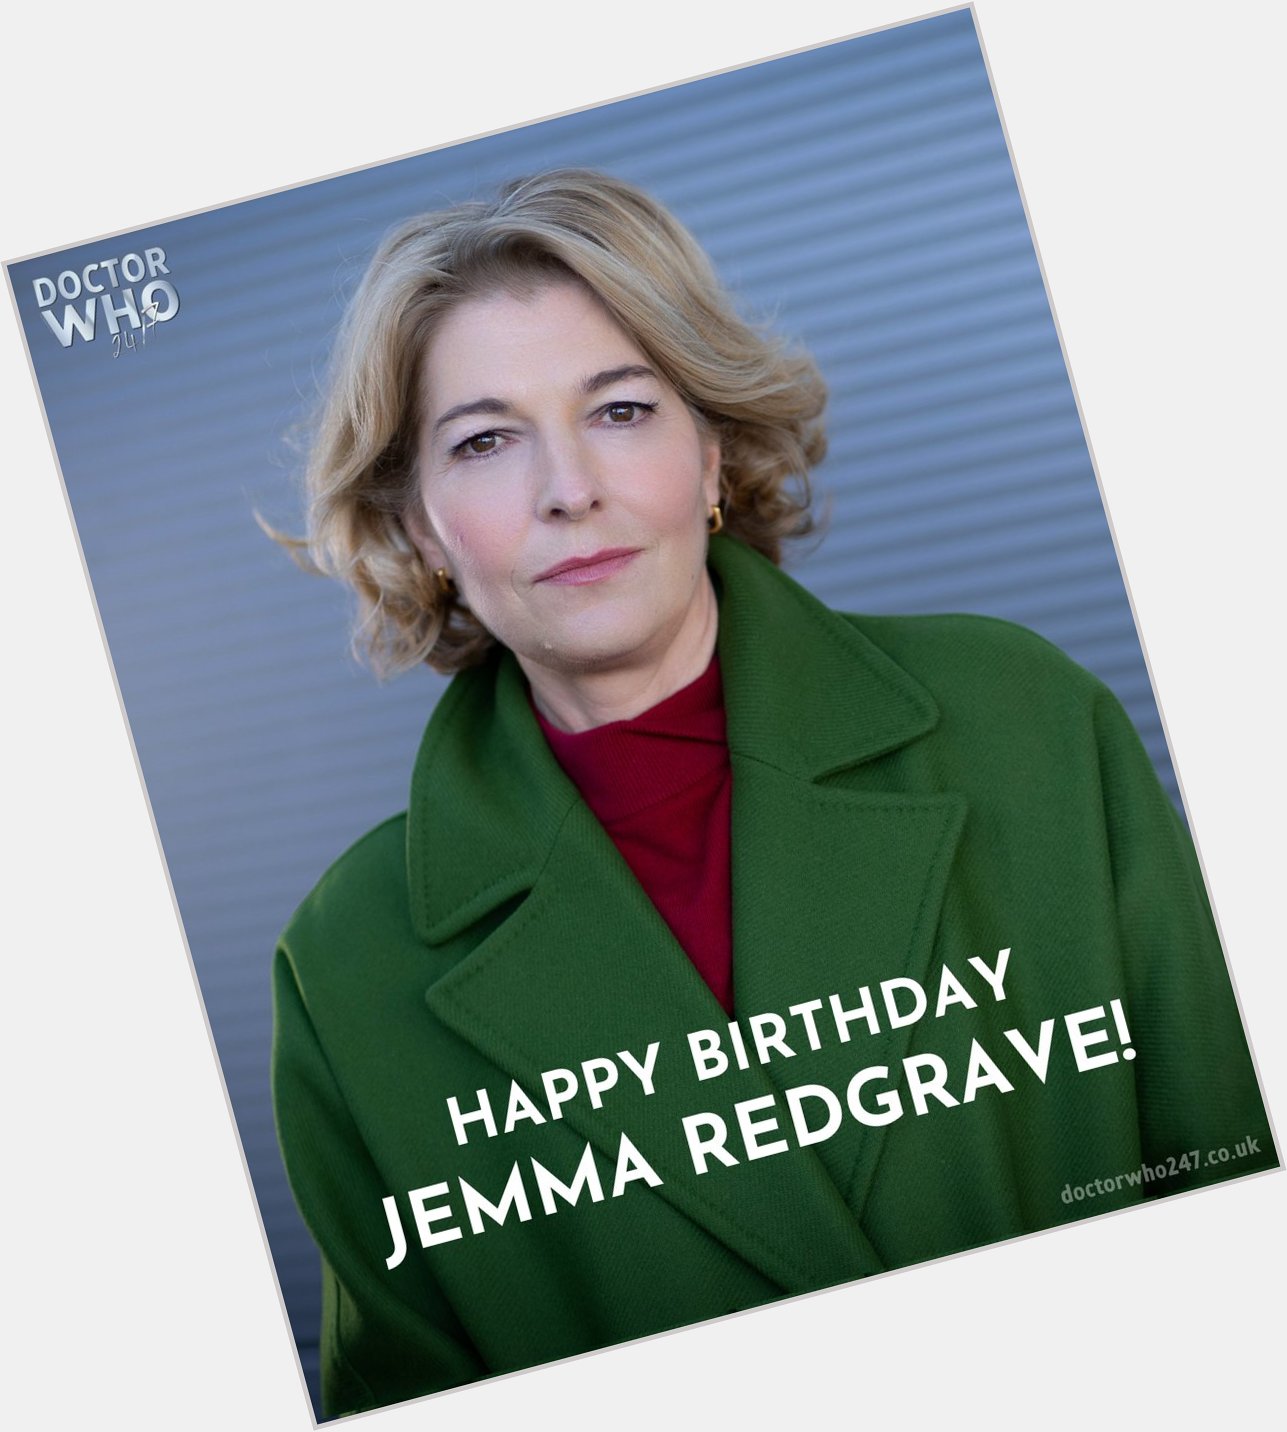 Wishing a happy birthday to Jemma Redgrave, better known to fans as Kate Lethbridge-Stewart!  